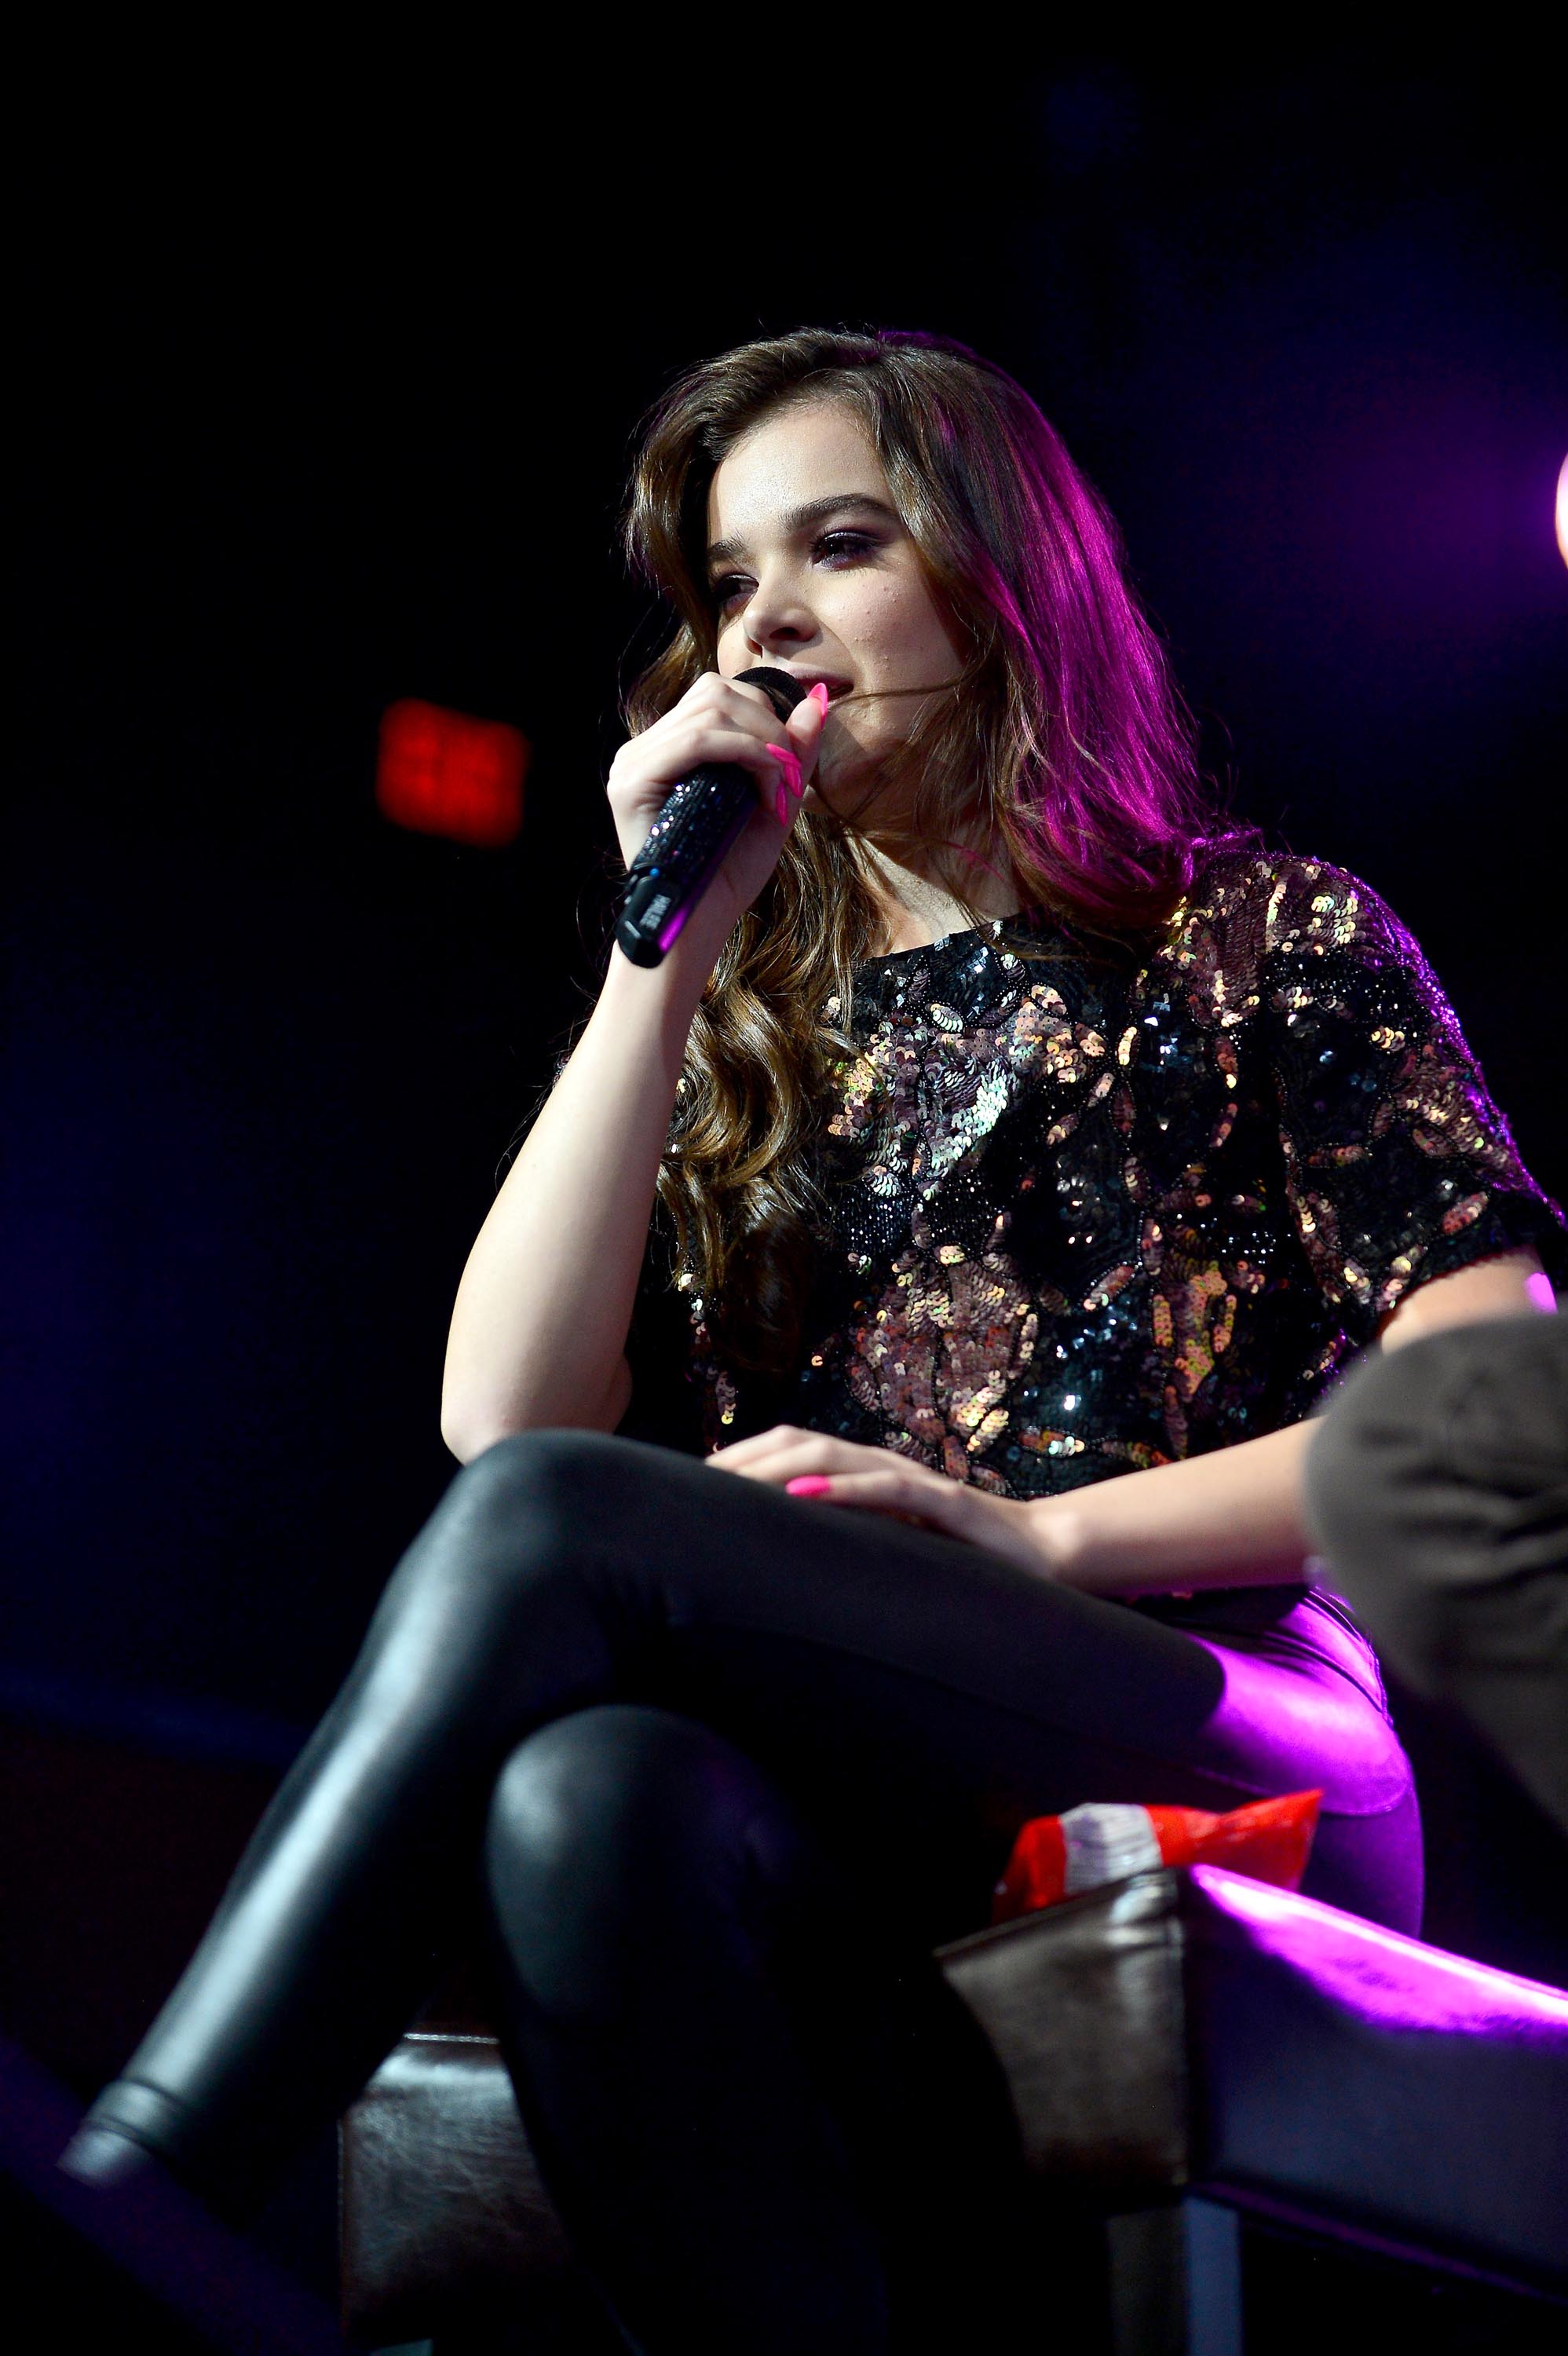 Hailee Steinfeld attends Hits 97.3 Sessions